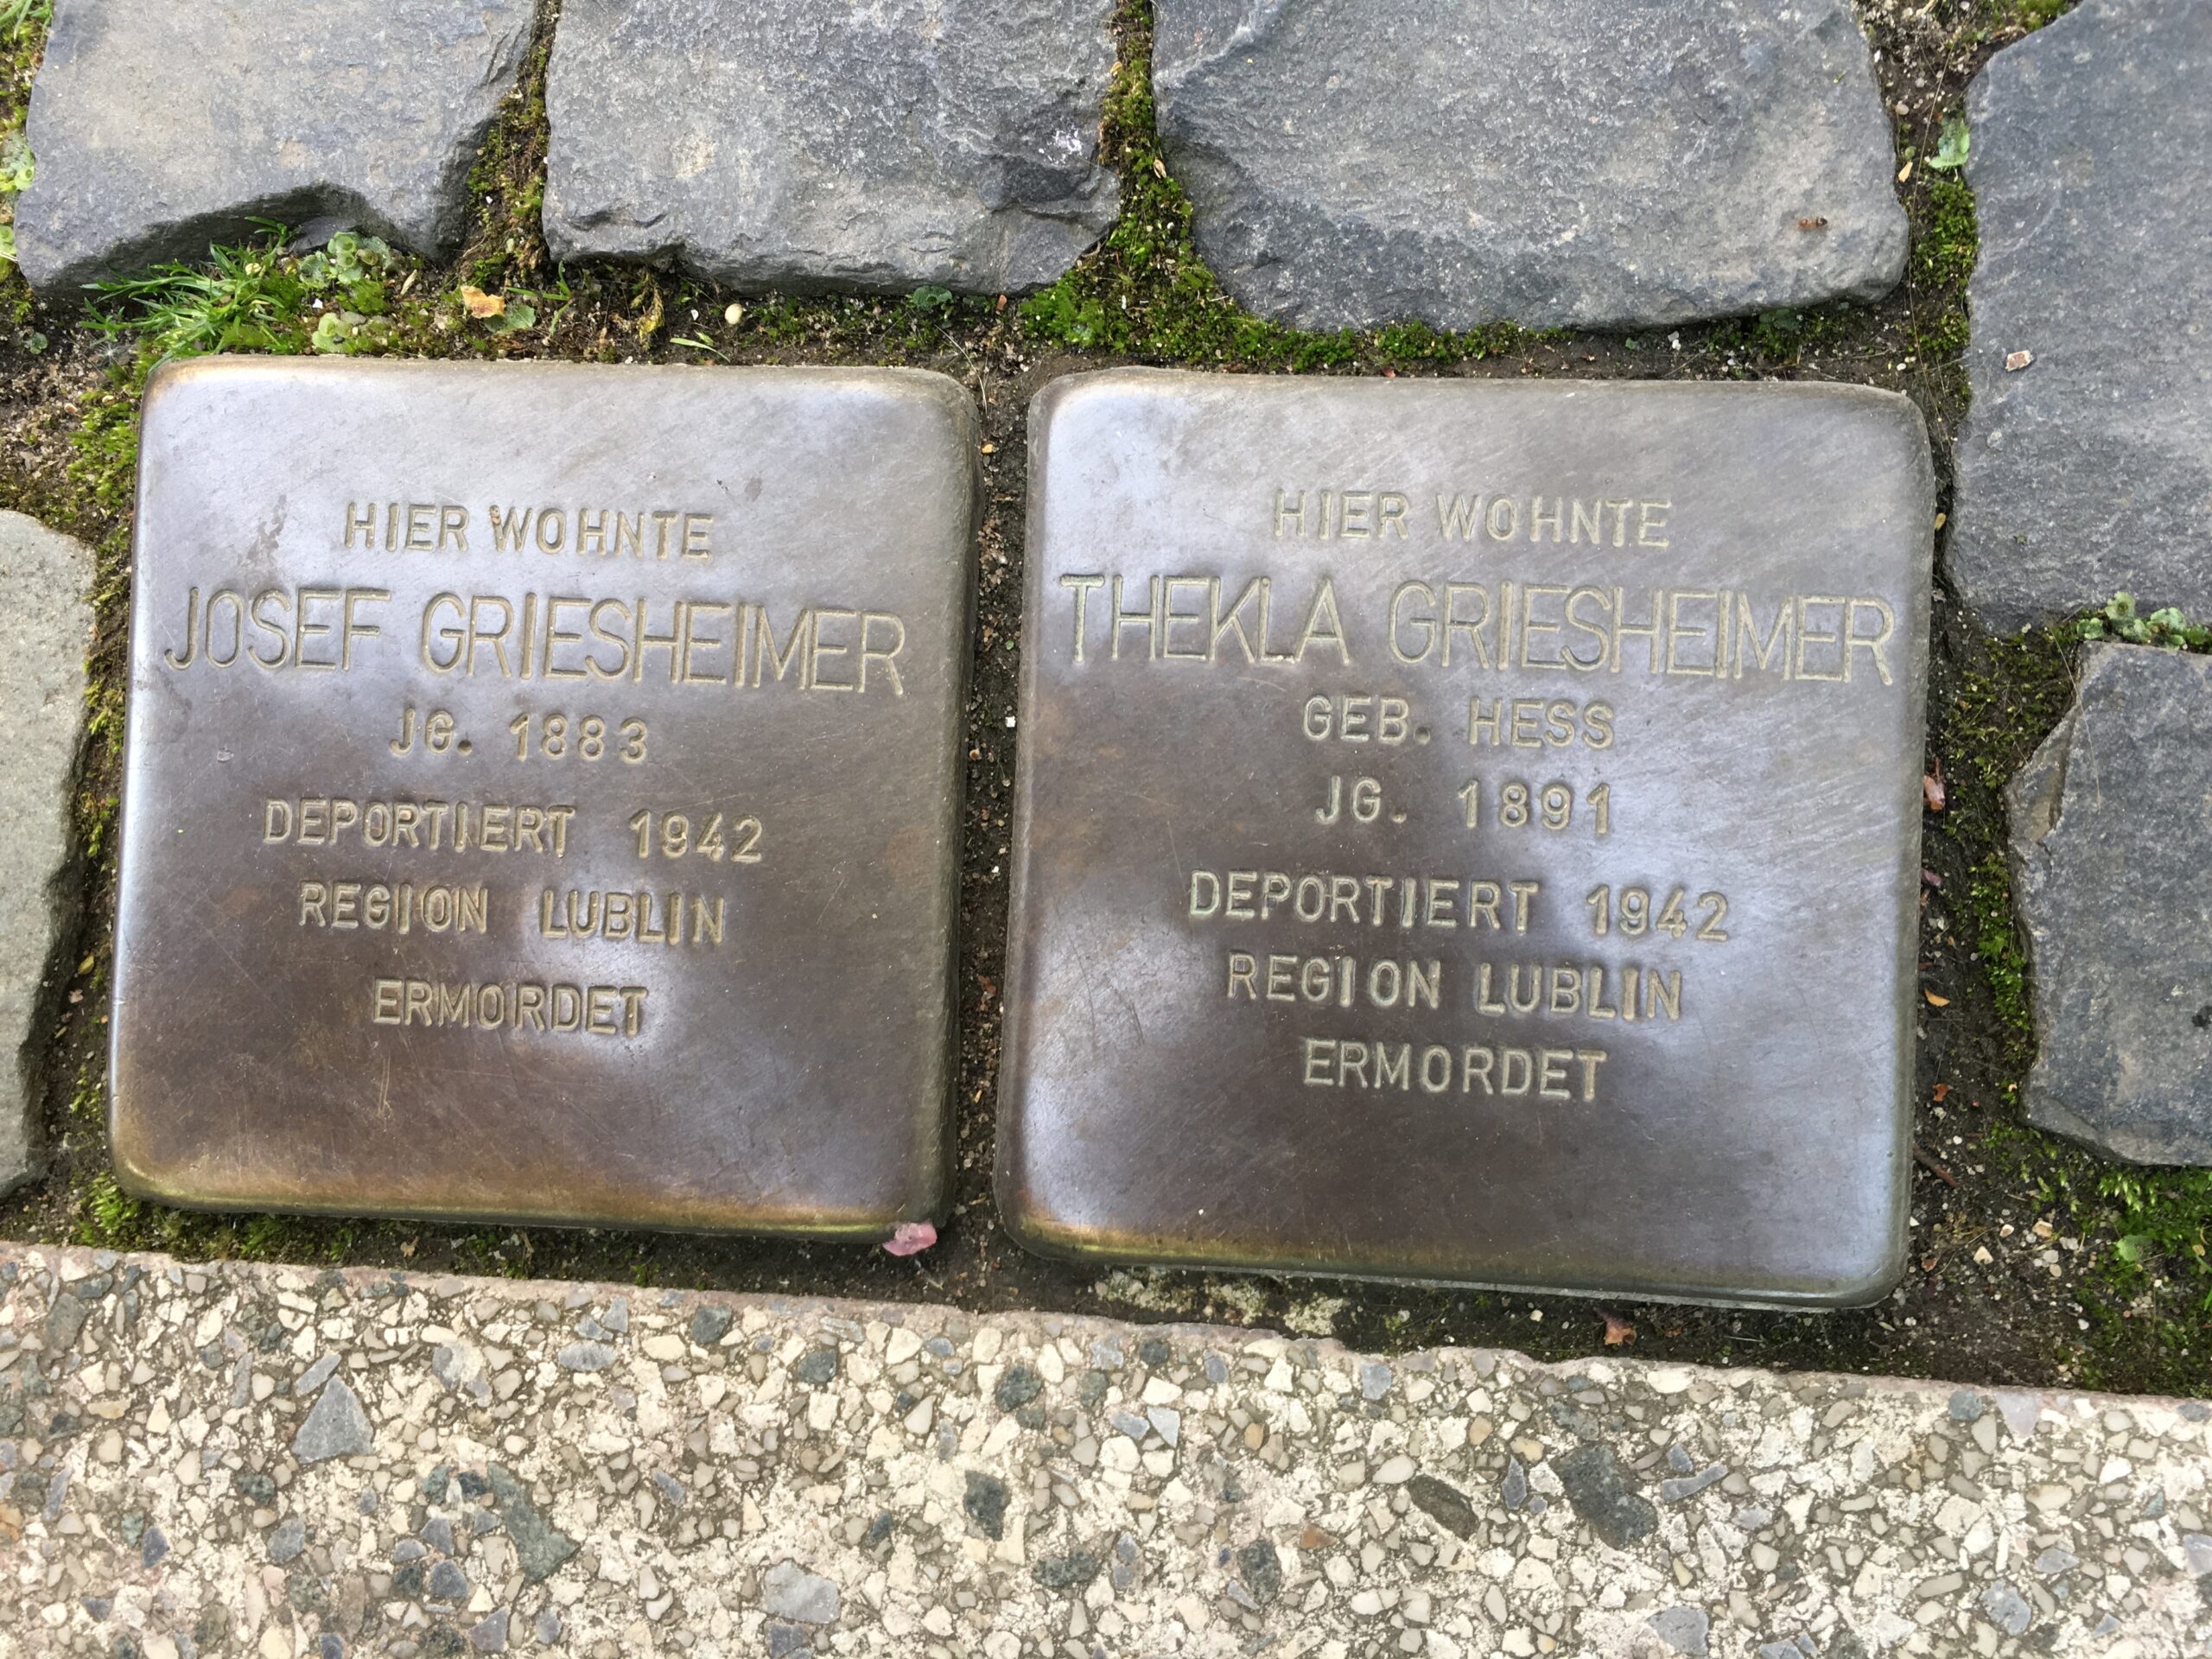 Two stones at the entrance of the house, family members that died in the Holocaust